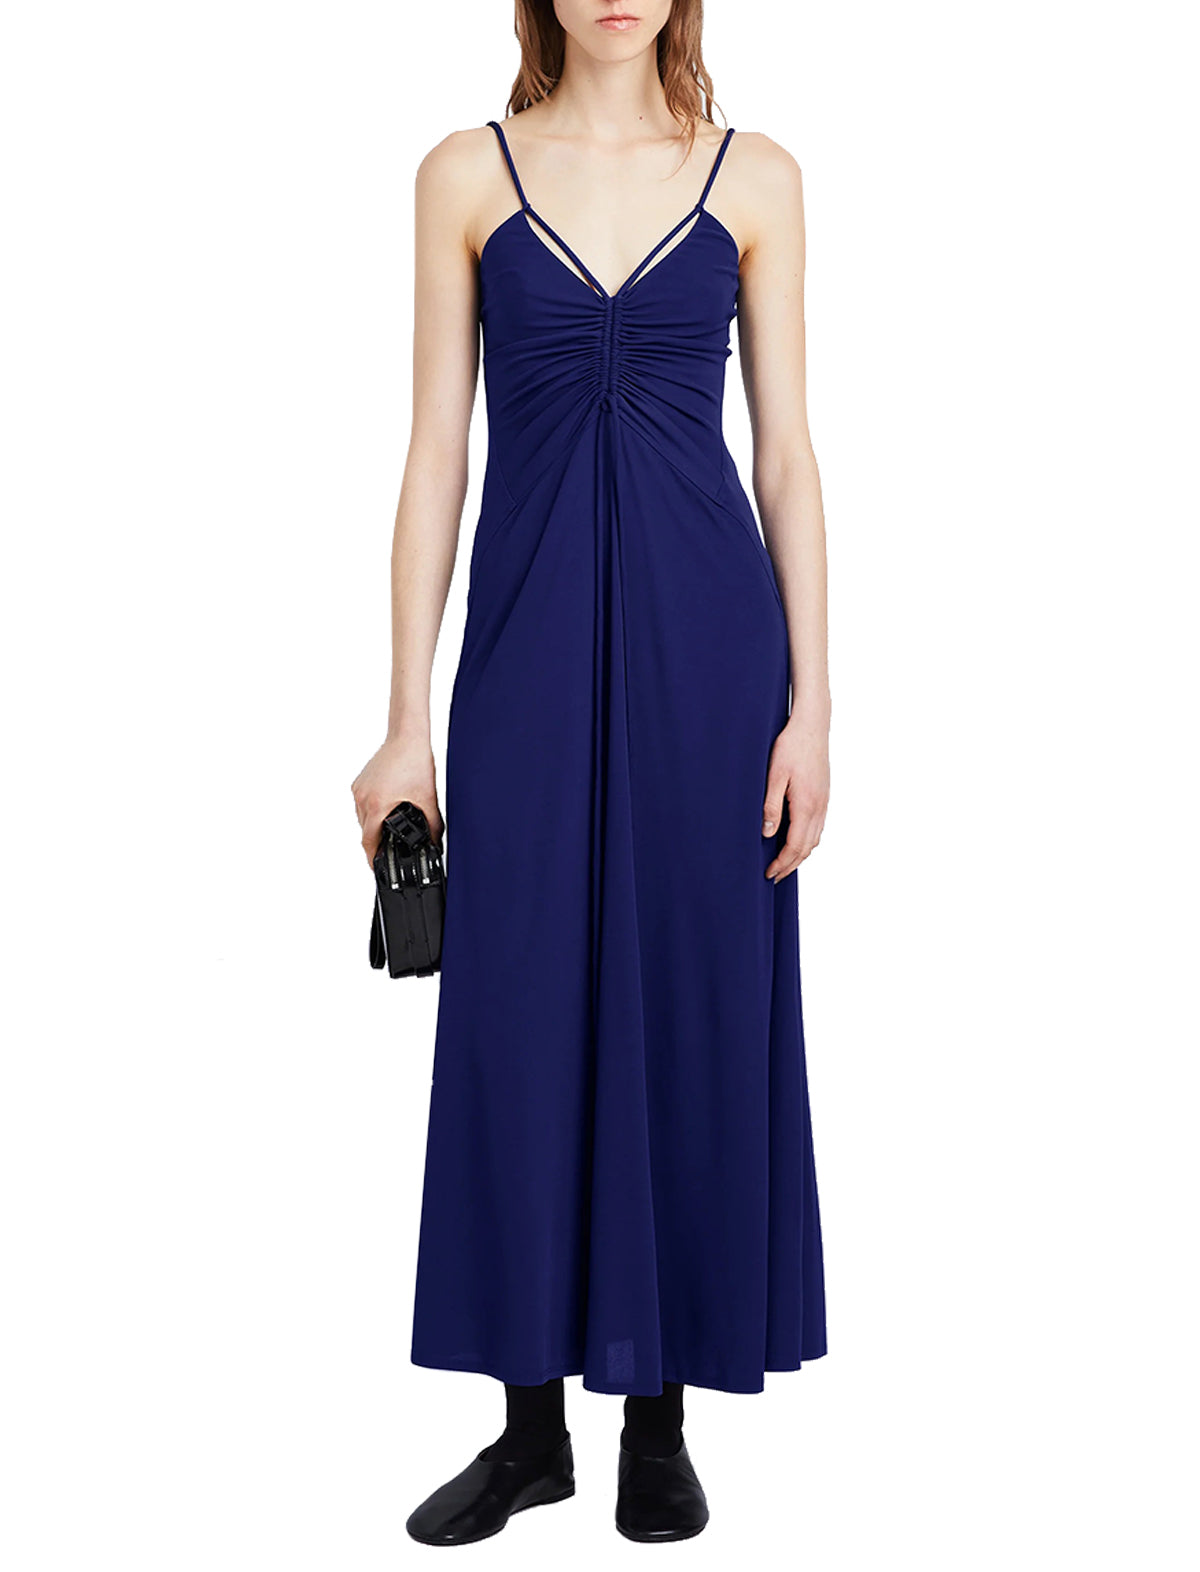 PROENZA SCHOULER WHITE LABEL Ruched Jersey Midi Dress in Blueberry